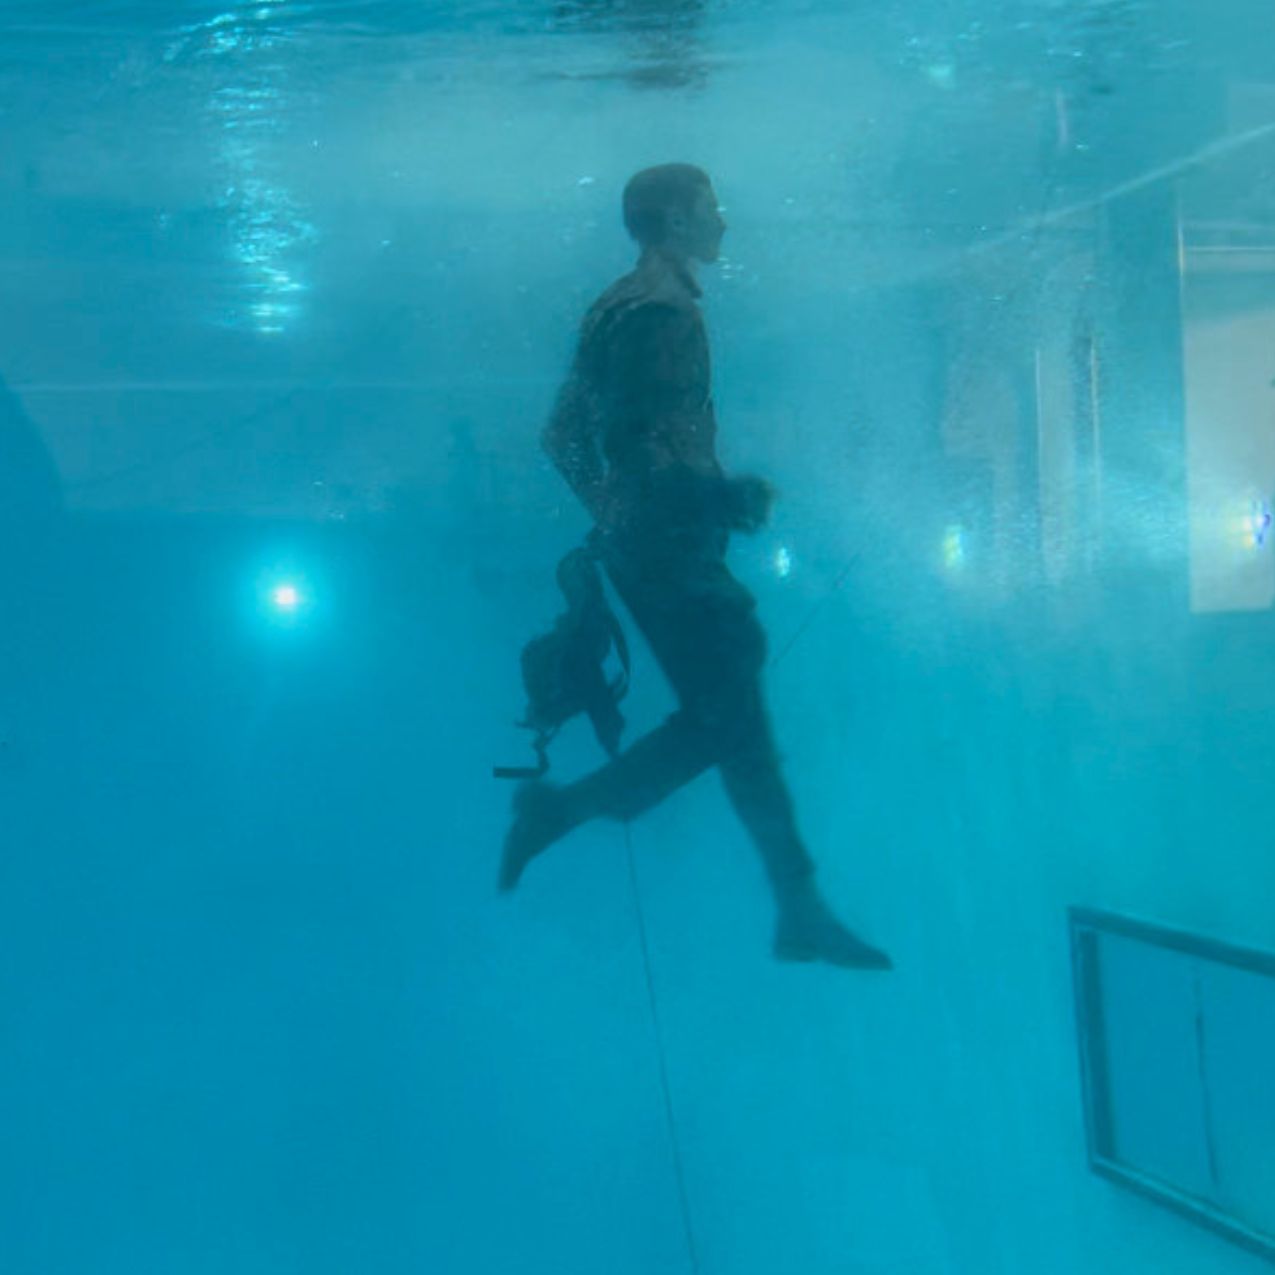 An ISU ROTC cadet does water training by jumping into the pool fully clothed with equipment. This photo is taken underwater and shows the student submerged in the water.